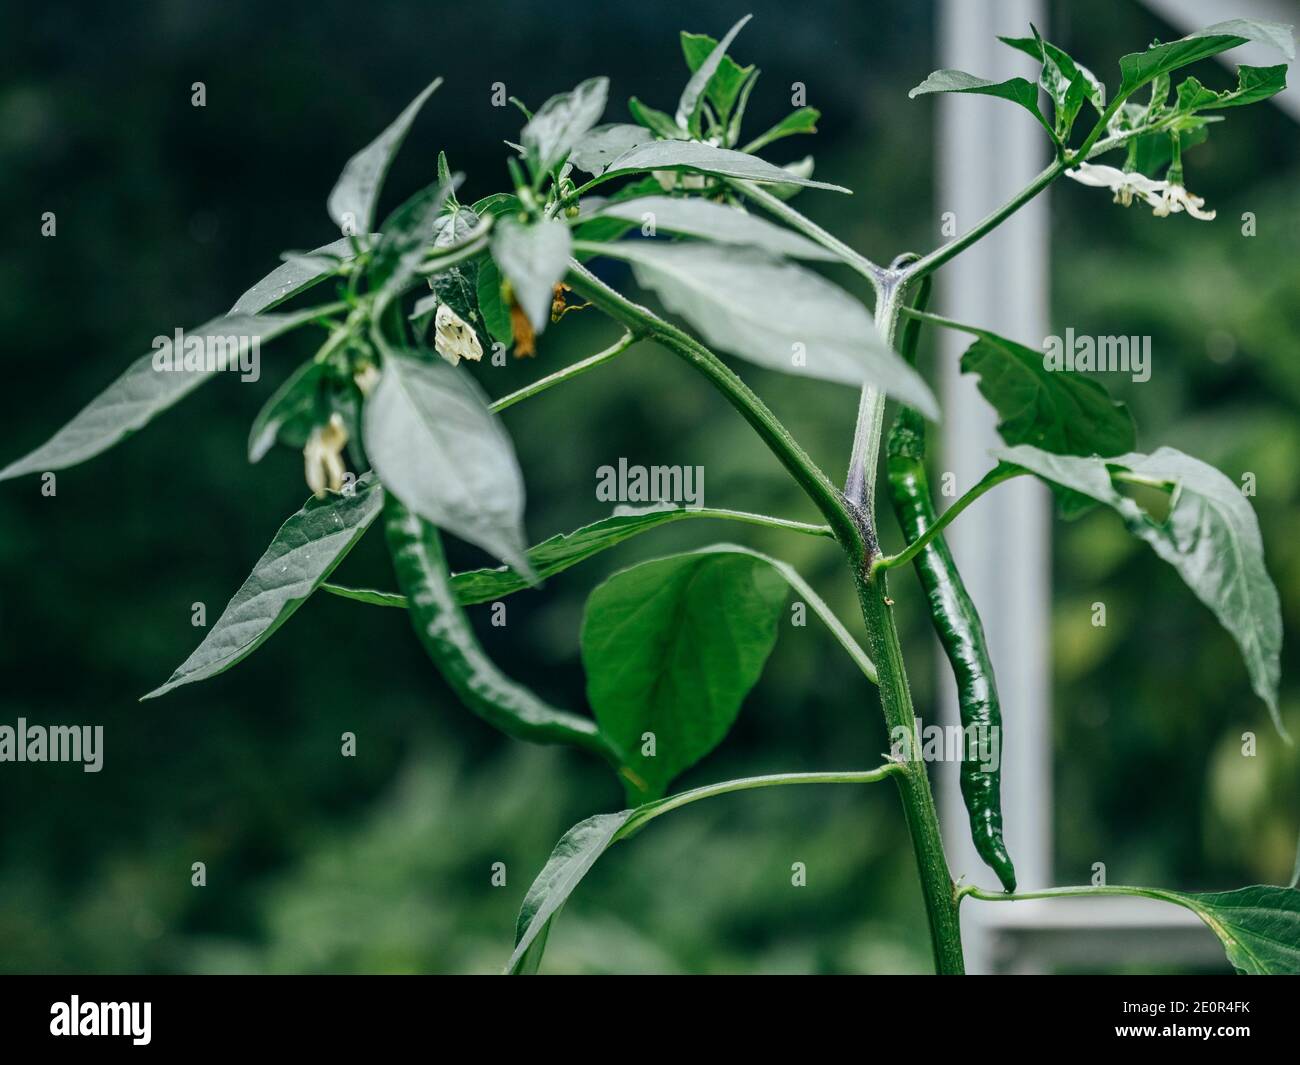 Close up of chilli plant inside greenhouse with white flowers and bearing long thin green chillies Stock Photo